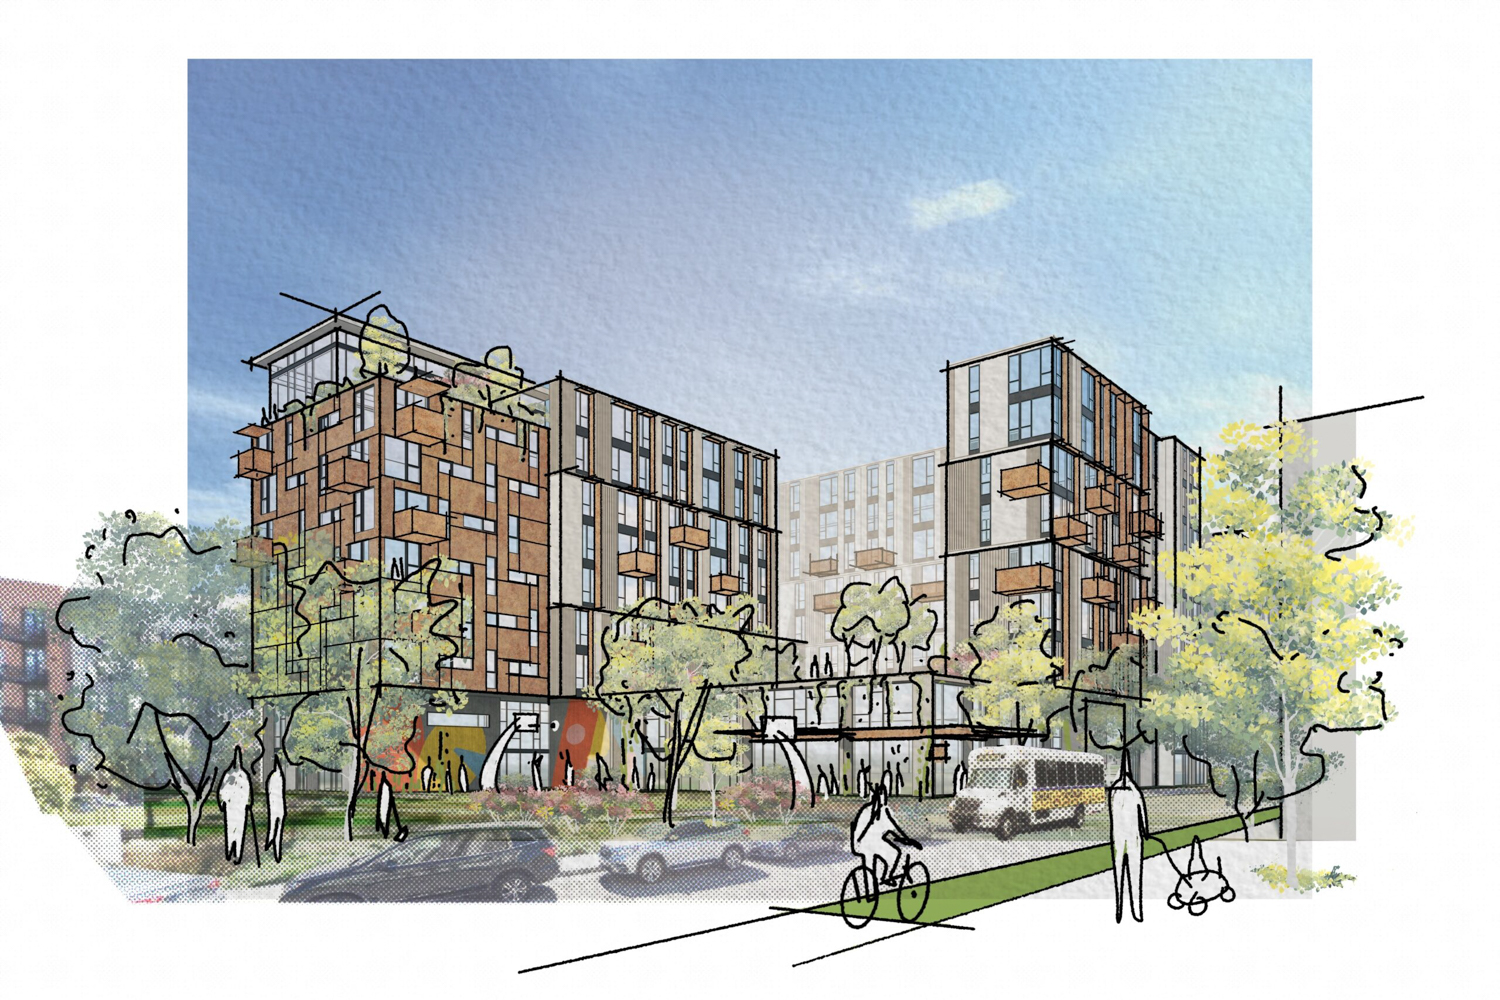 Christie Avenue affordable housing project, rendering by David Baker Architects